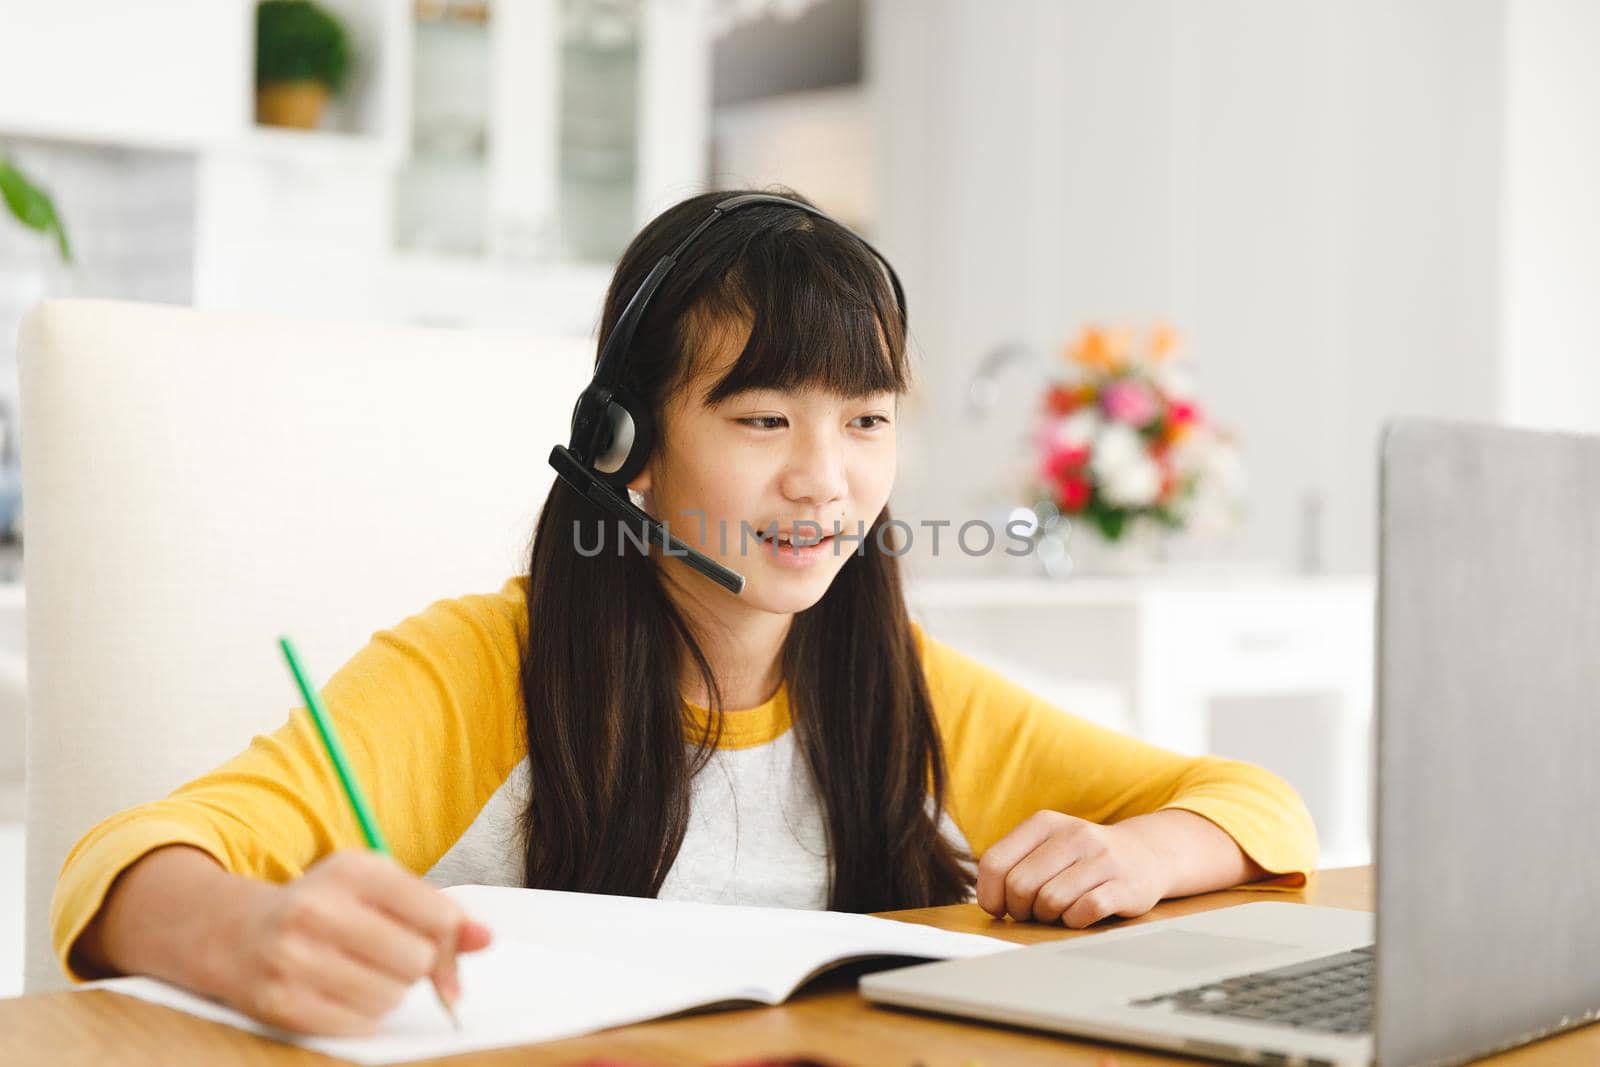 Asian girl sitting at table and using laptop during online lessons by Wavebreakmedia